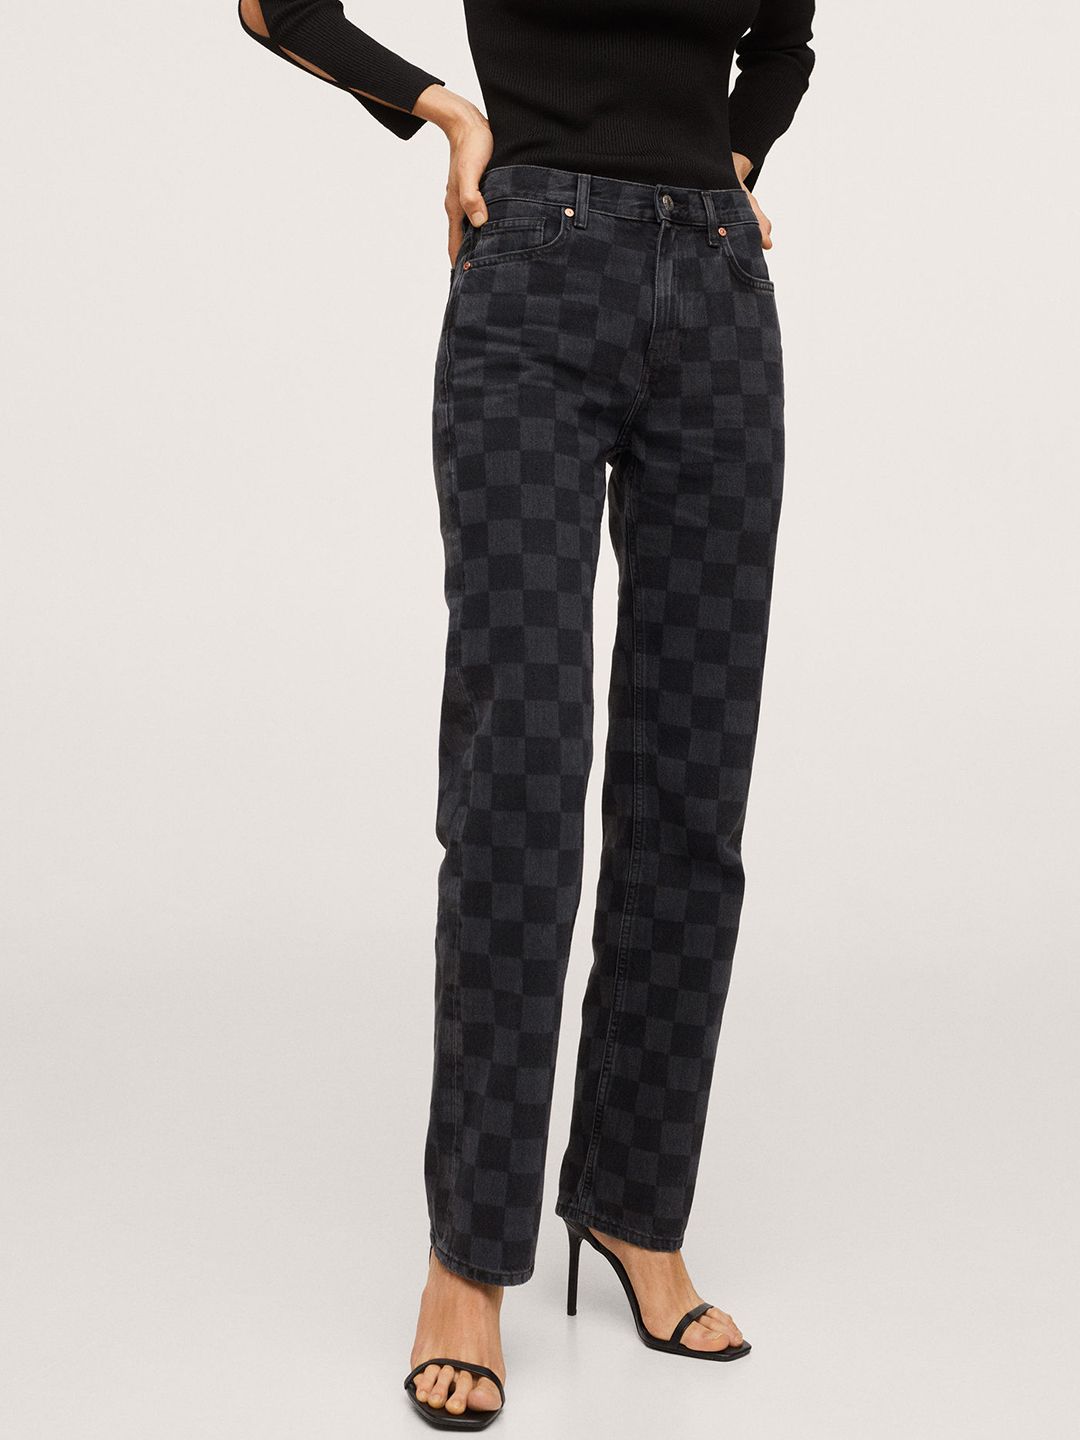 MANGO Women Black & Charcoal Grey Pure Cotton Checked Straight Fit Jeans Price in India